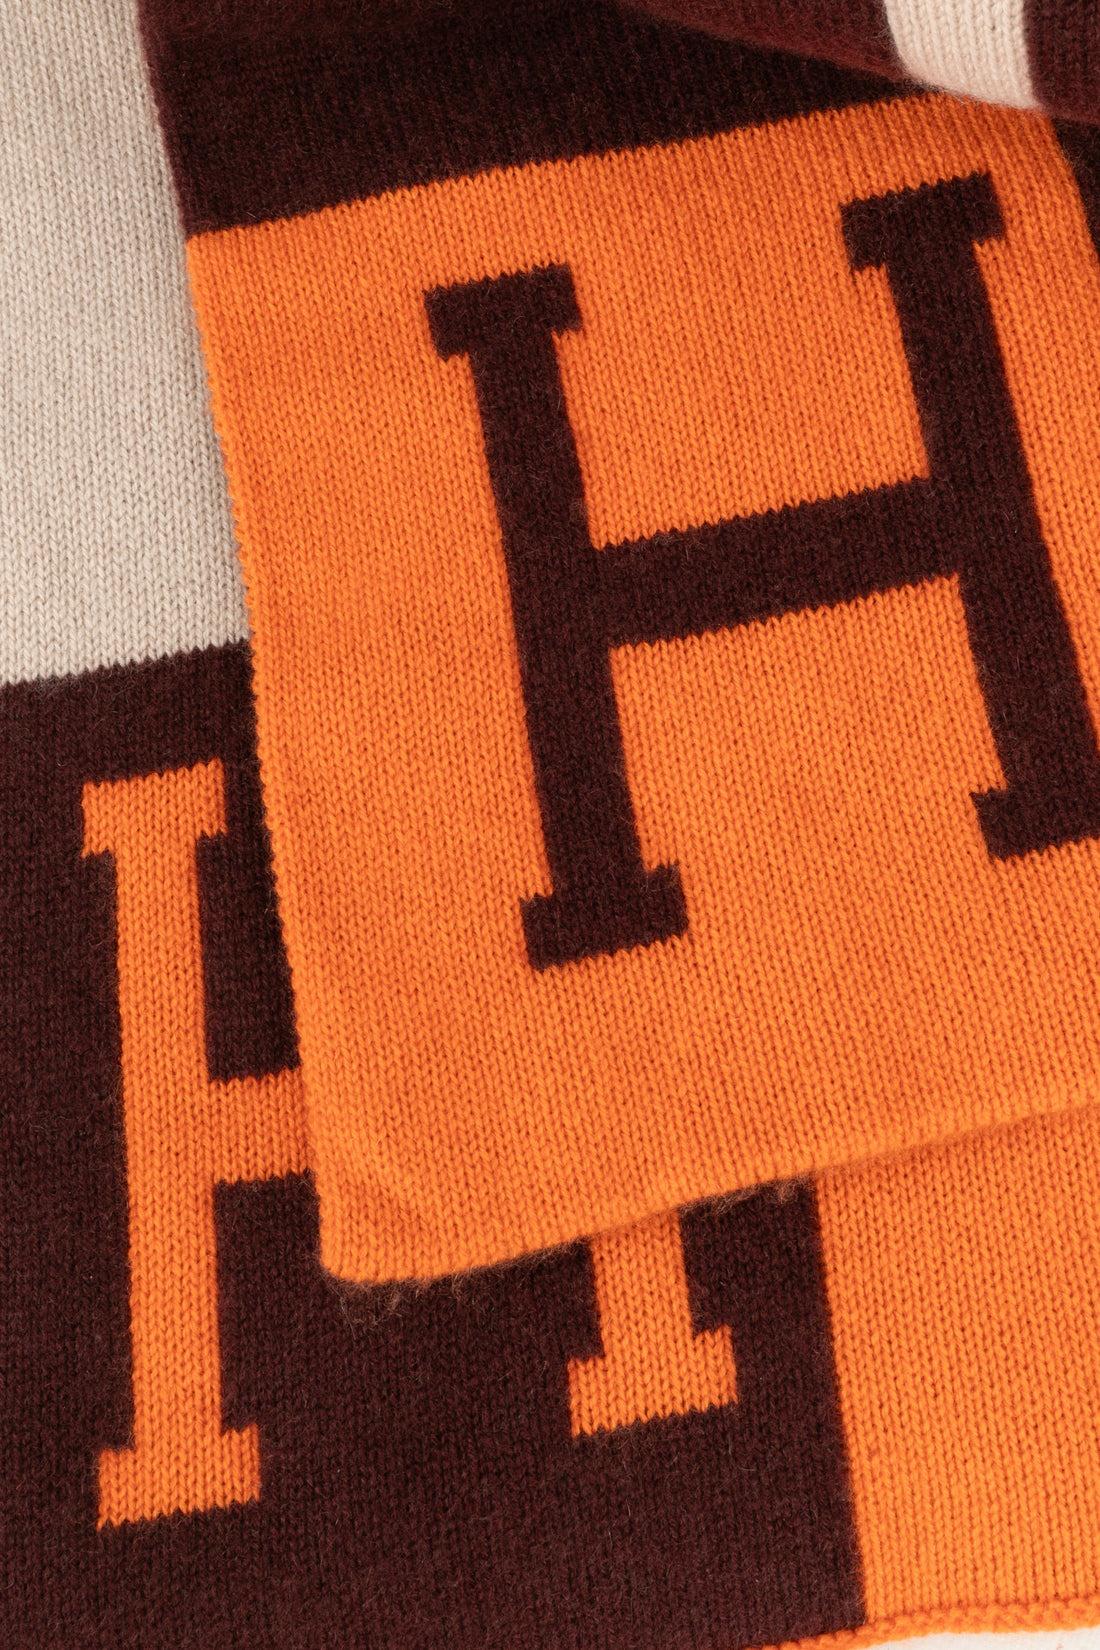 Hermès Cashmere and Wool Plaid/Blanket For Sale 3